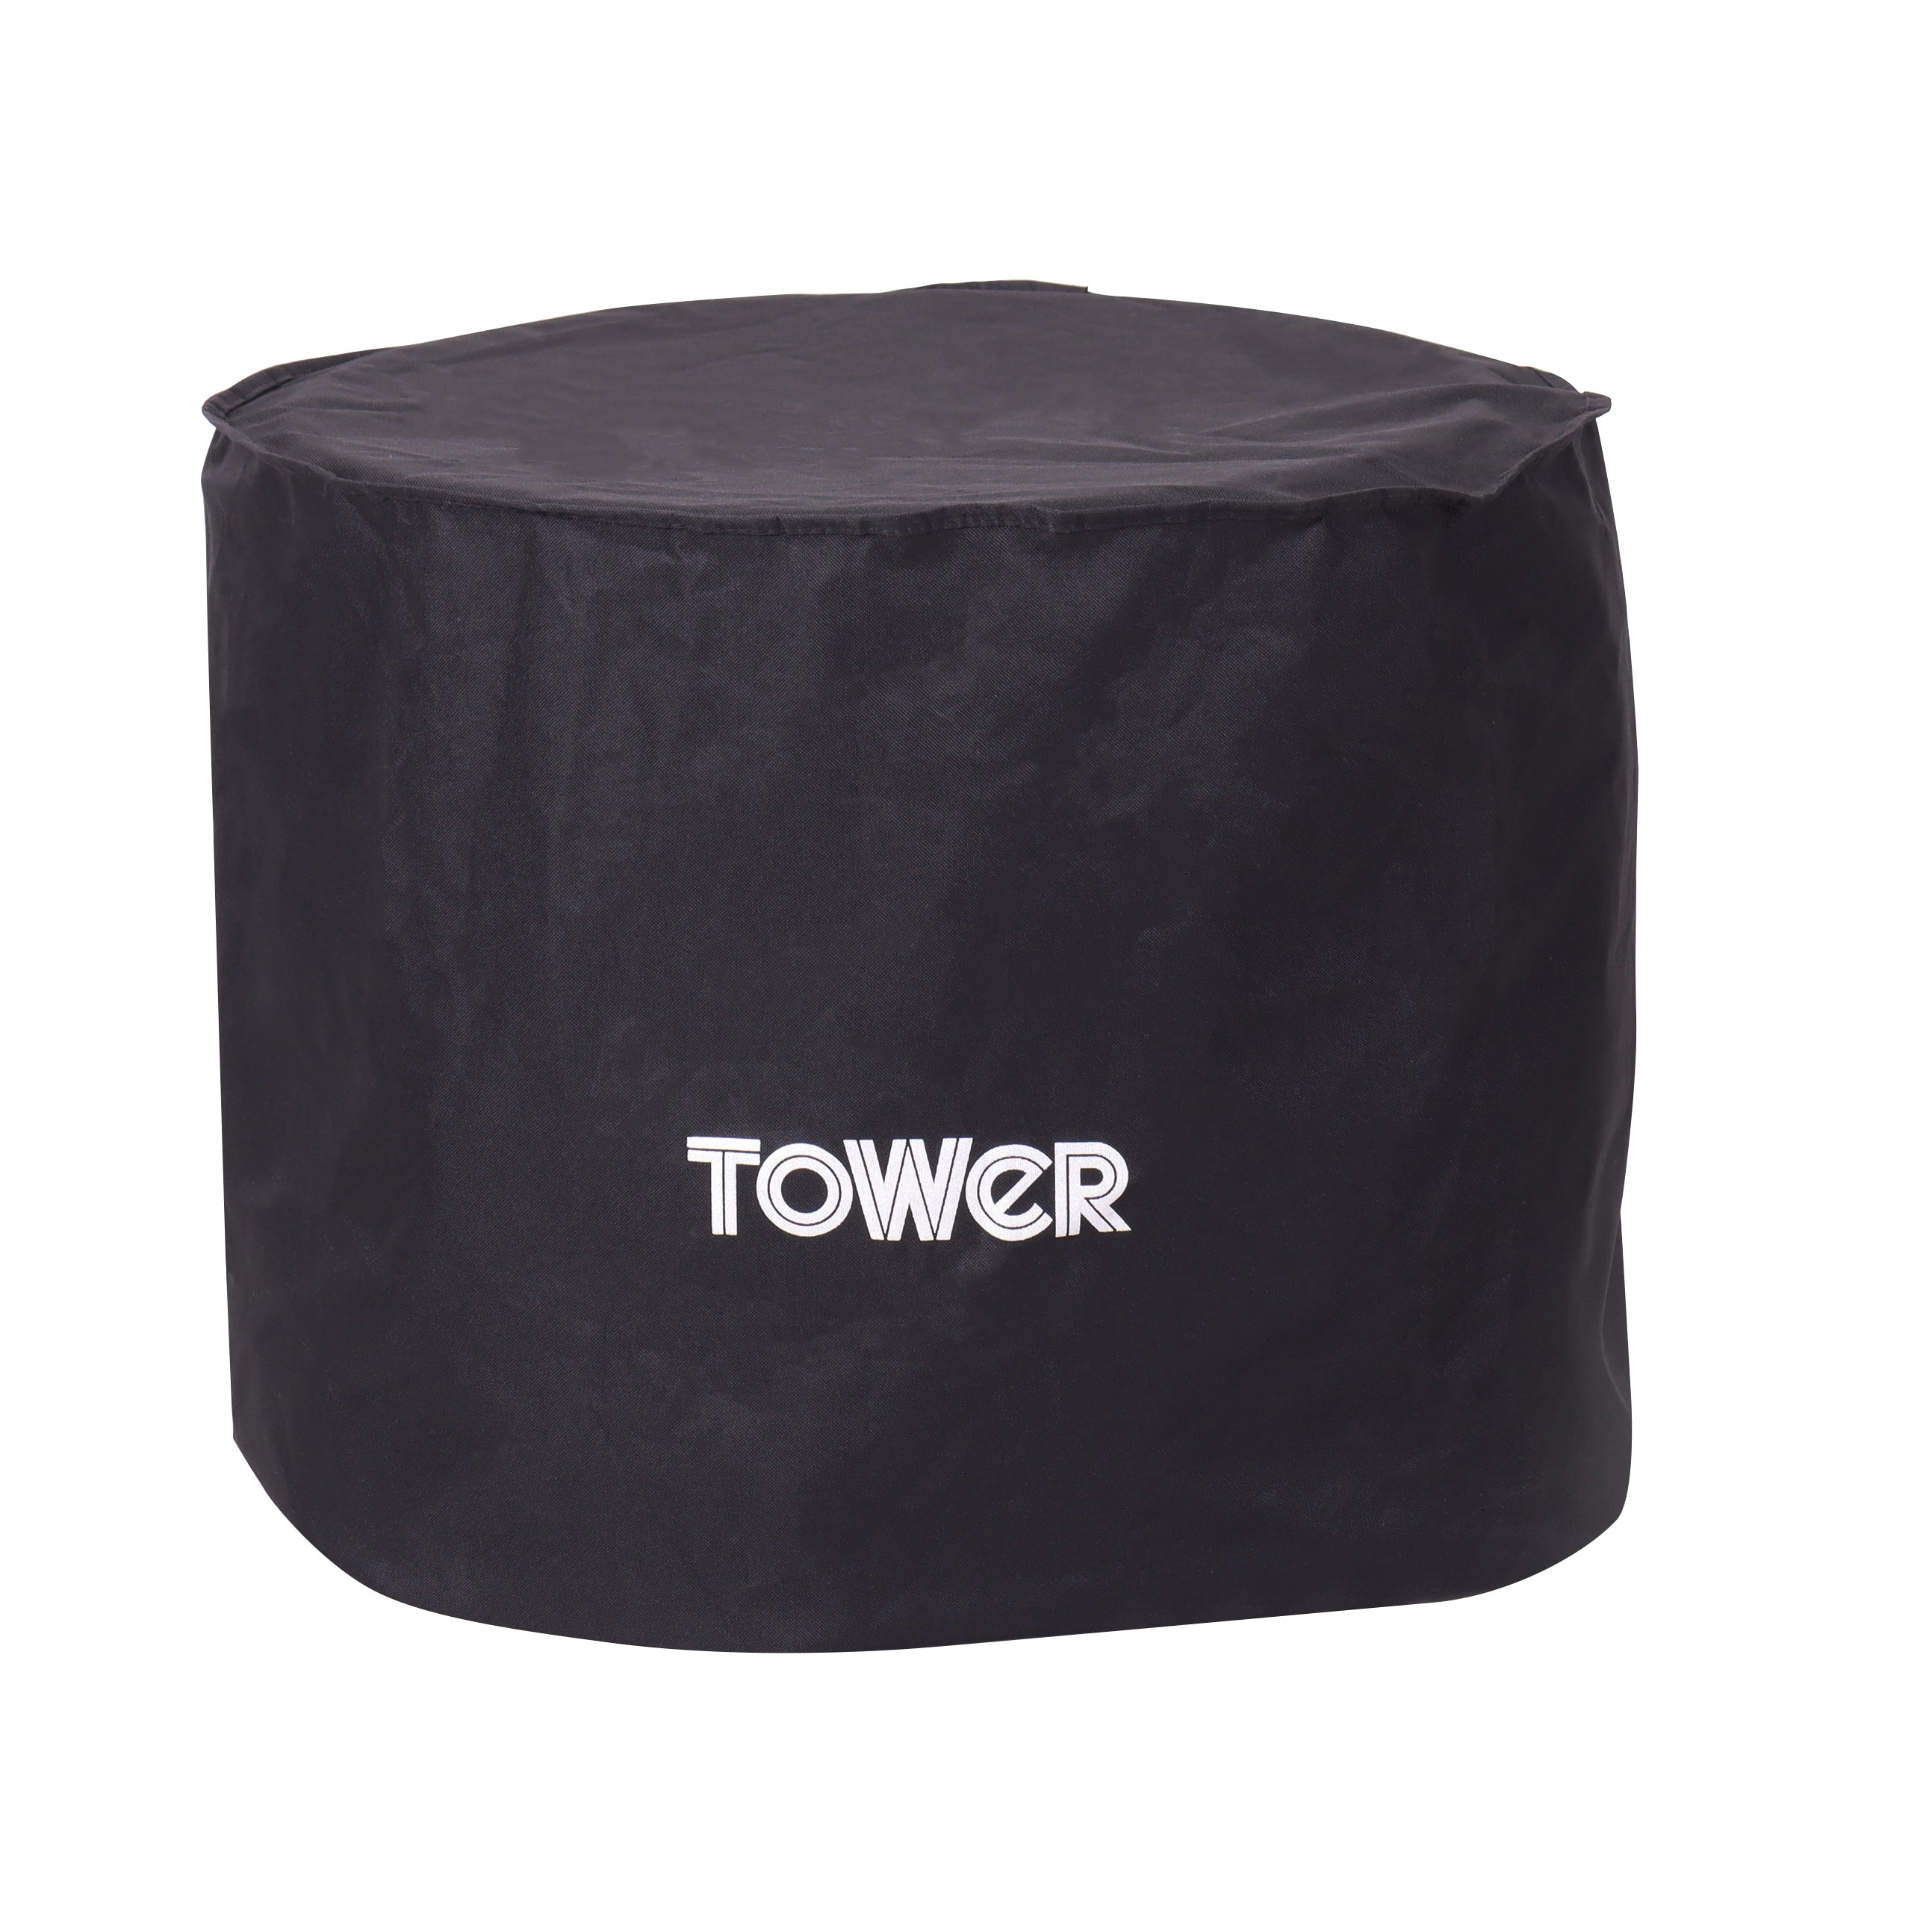 Tower Sphere BBQ Pit ’N’ Grill - Black - BBQ Grill Cover  | TJ Hughes